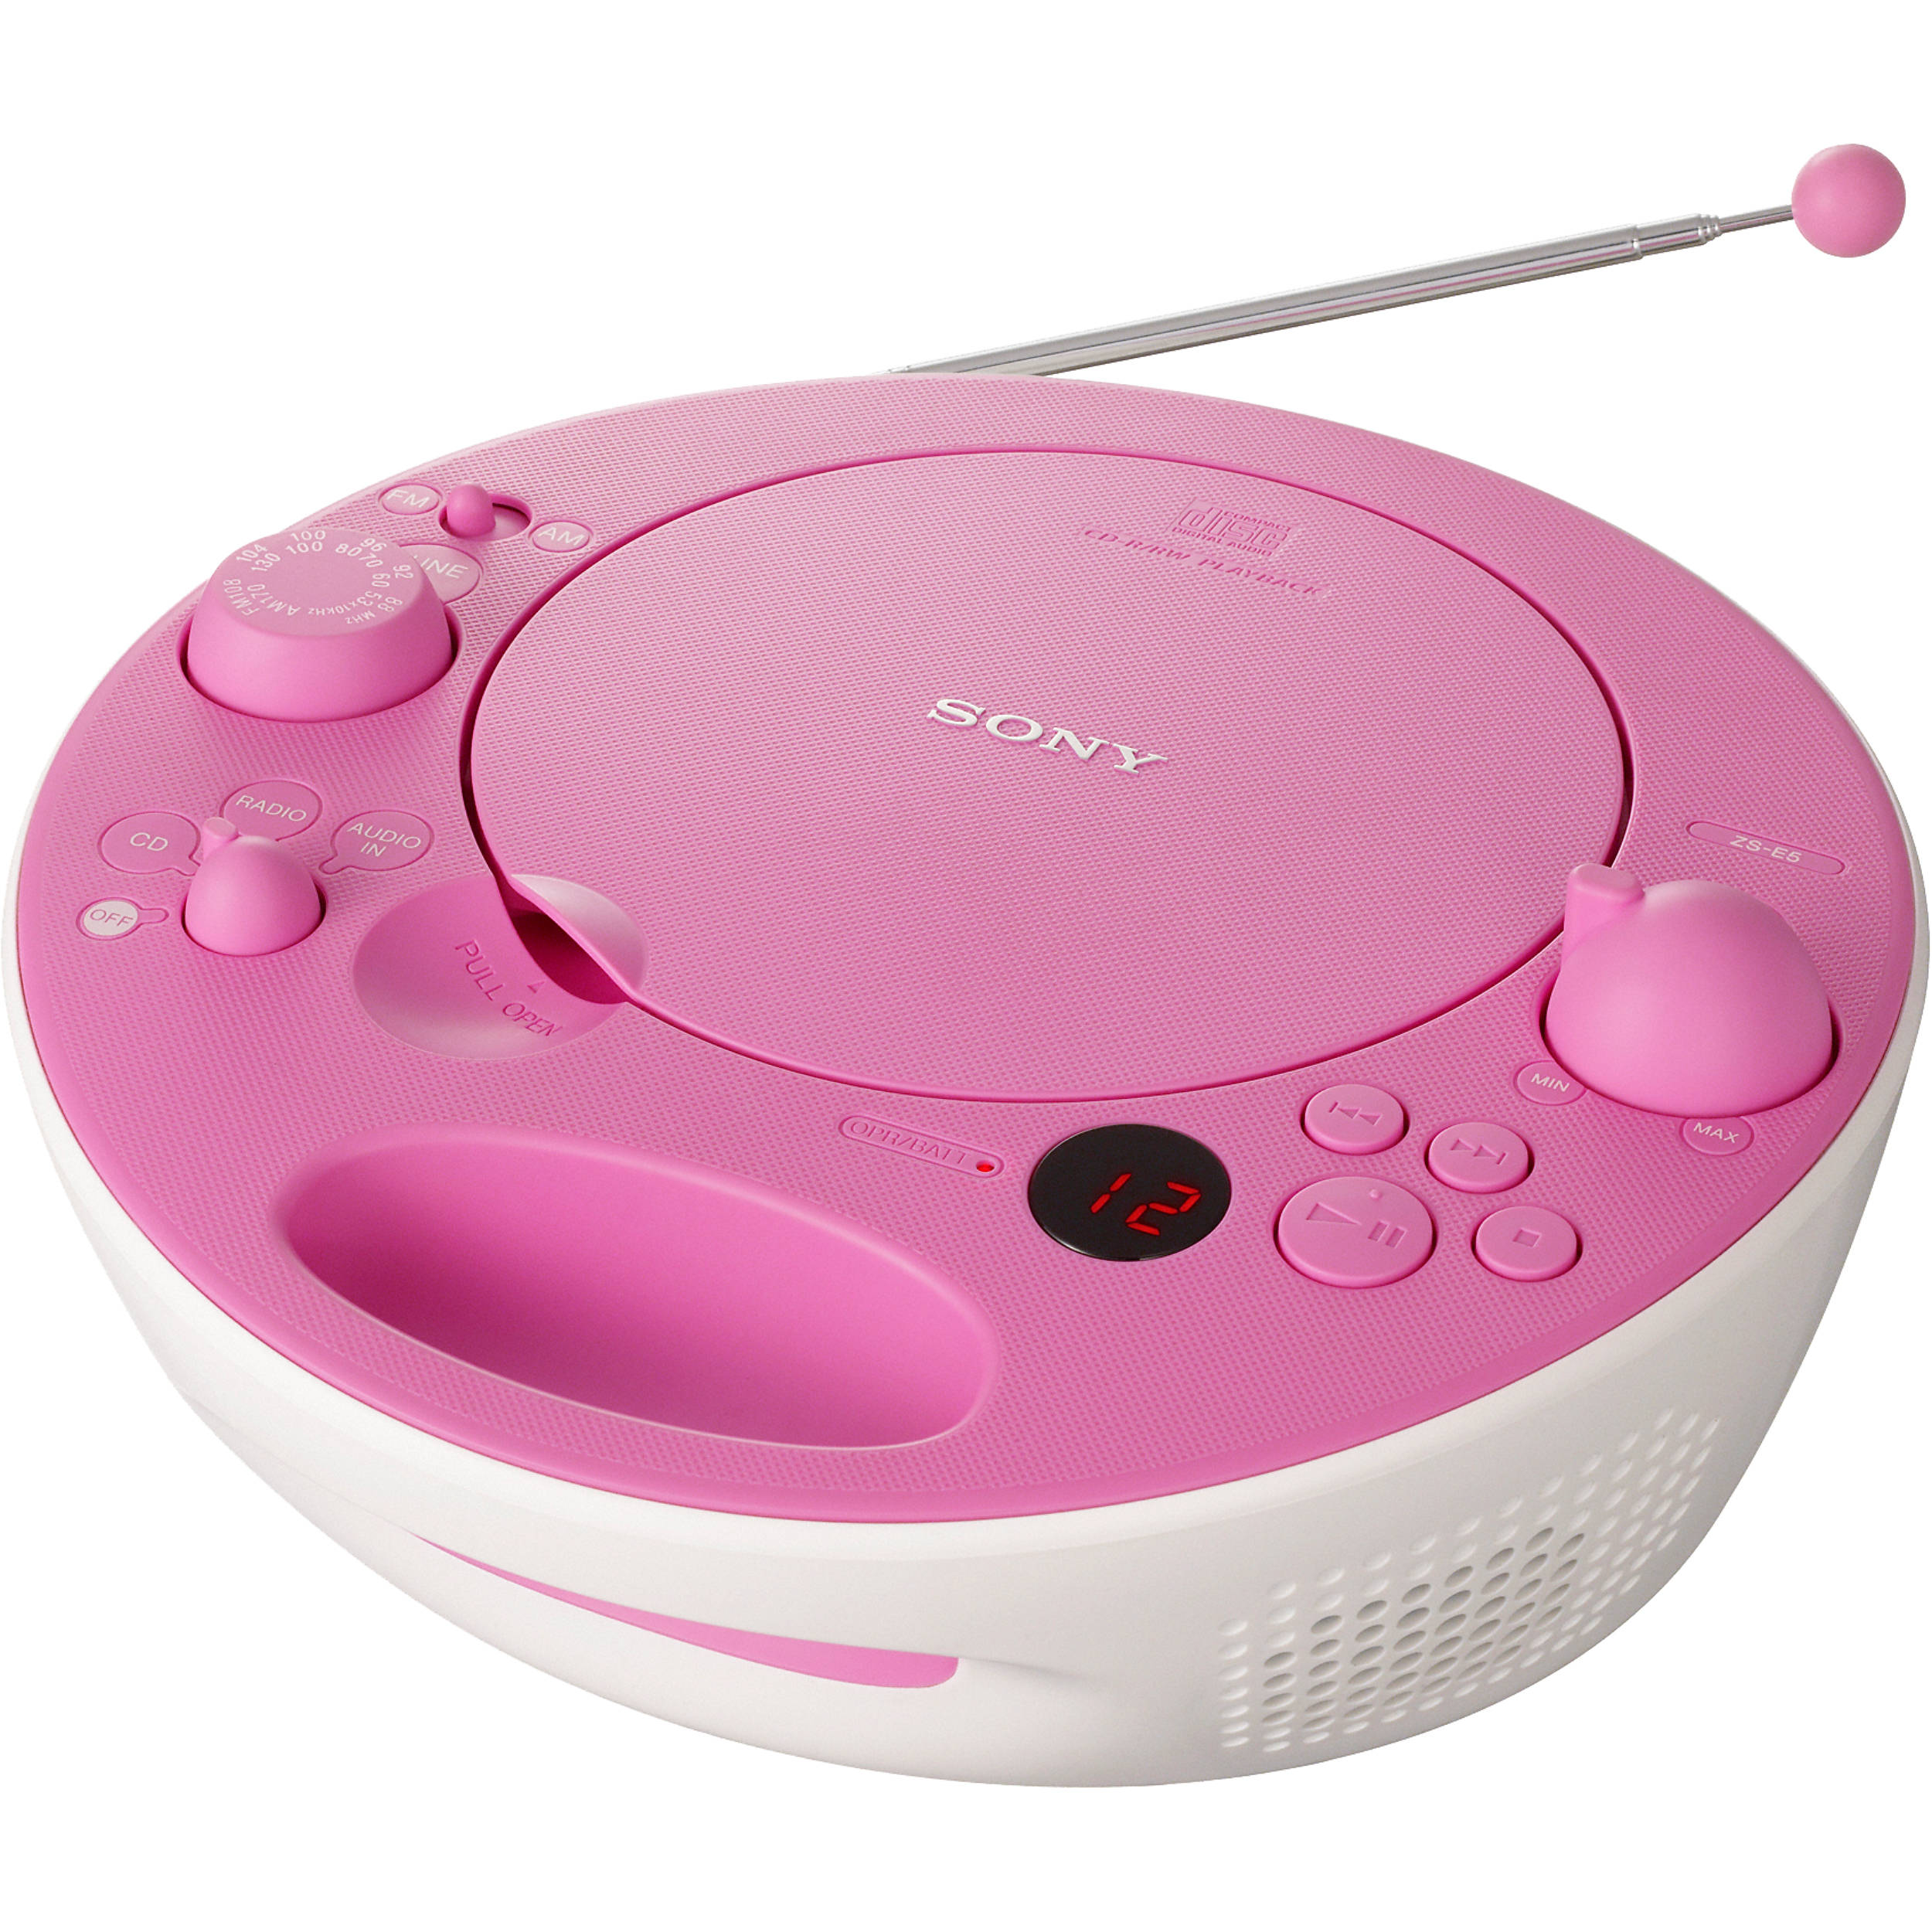 Sony Zs E5 Colorful Cd Boombox With Am Fm Tuner Pink Zs E5pink